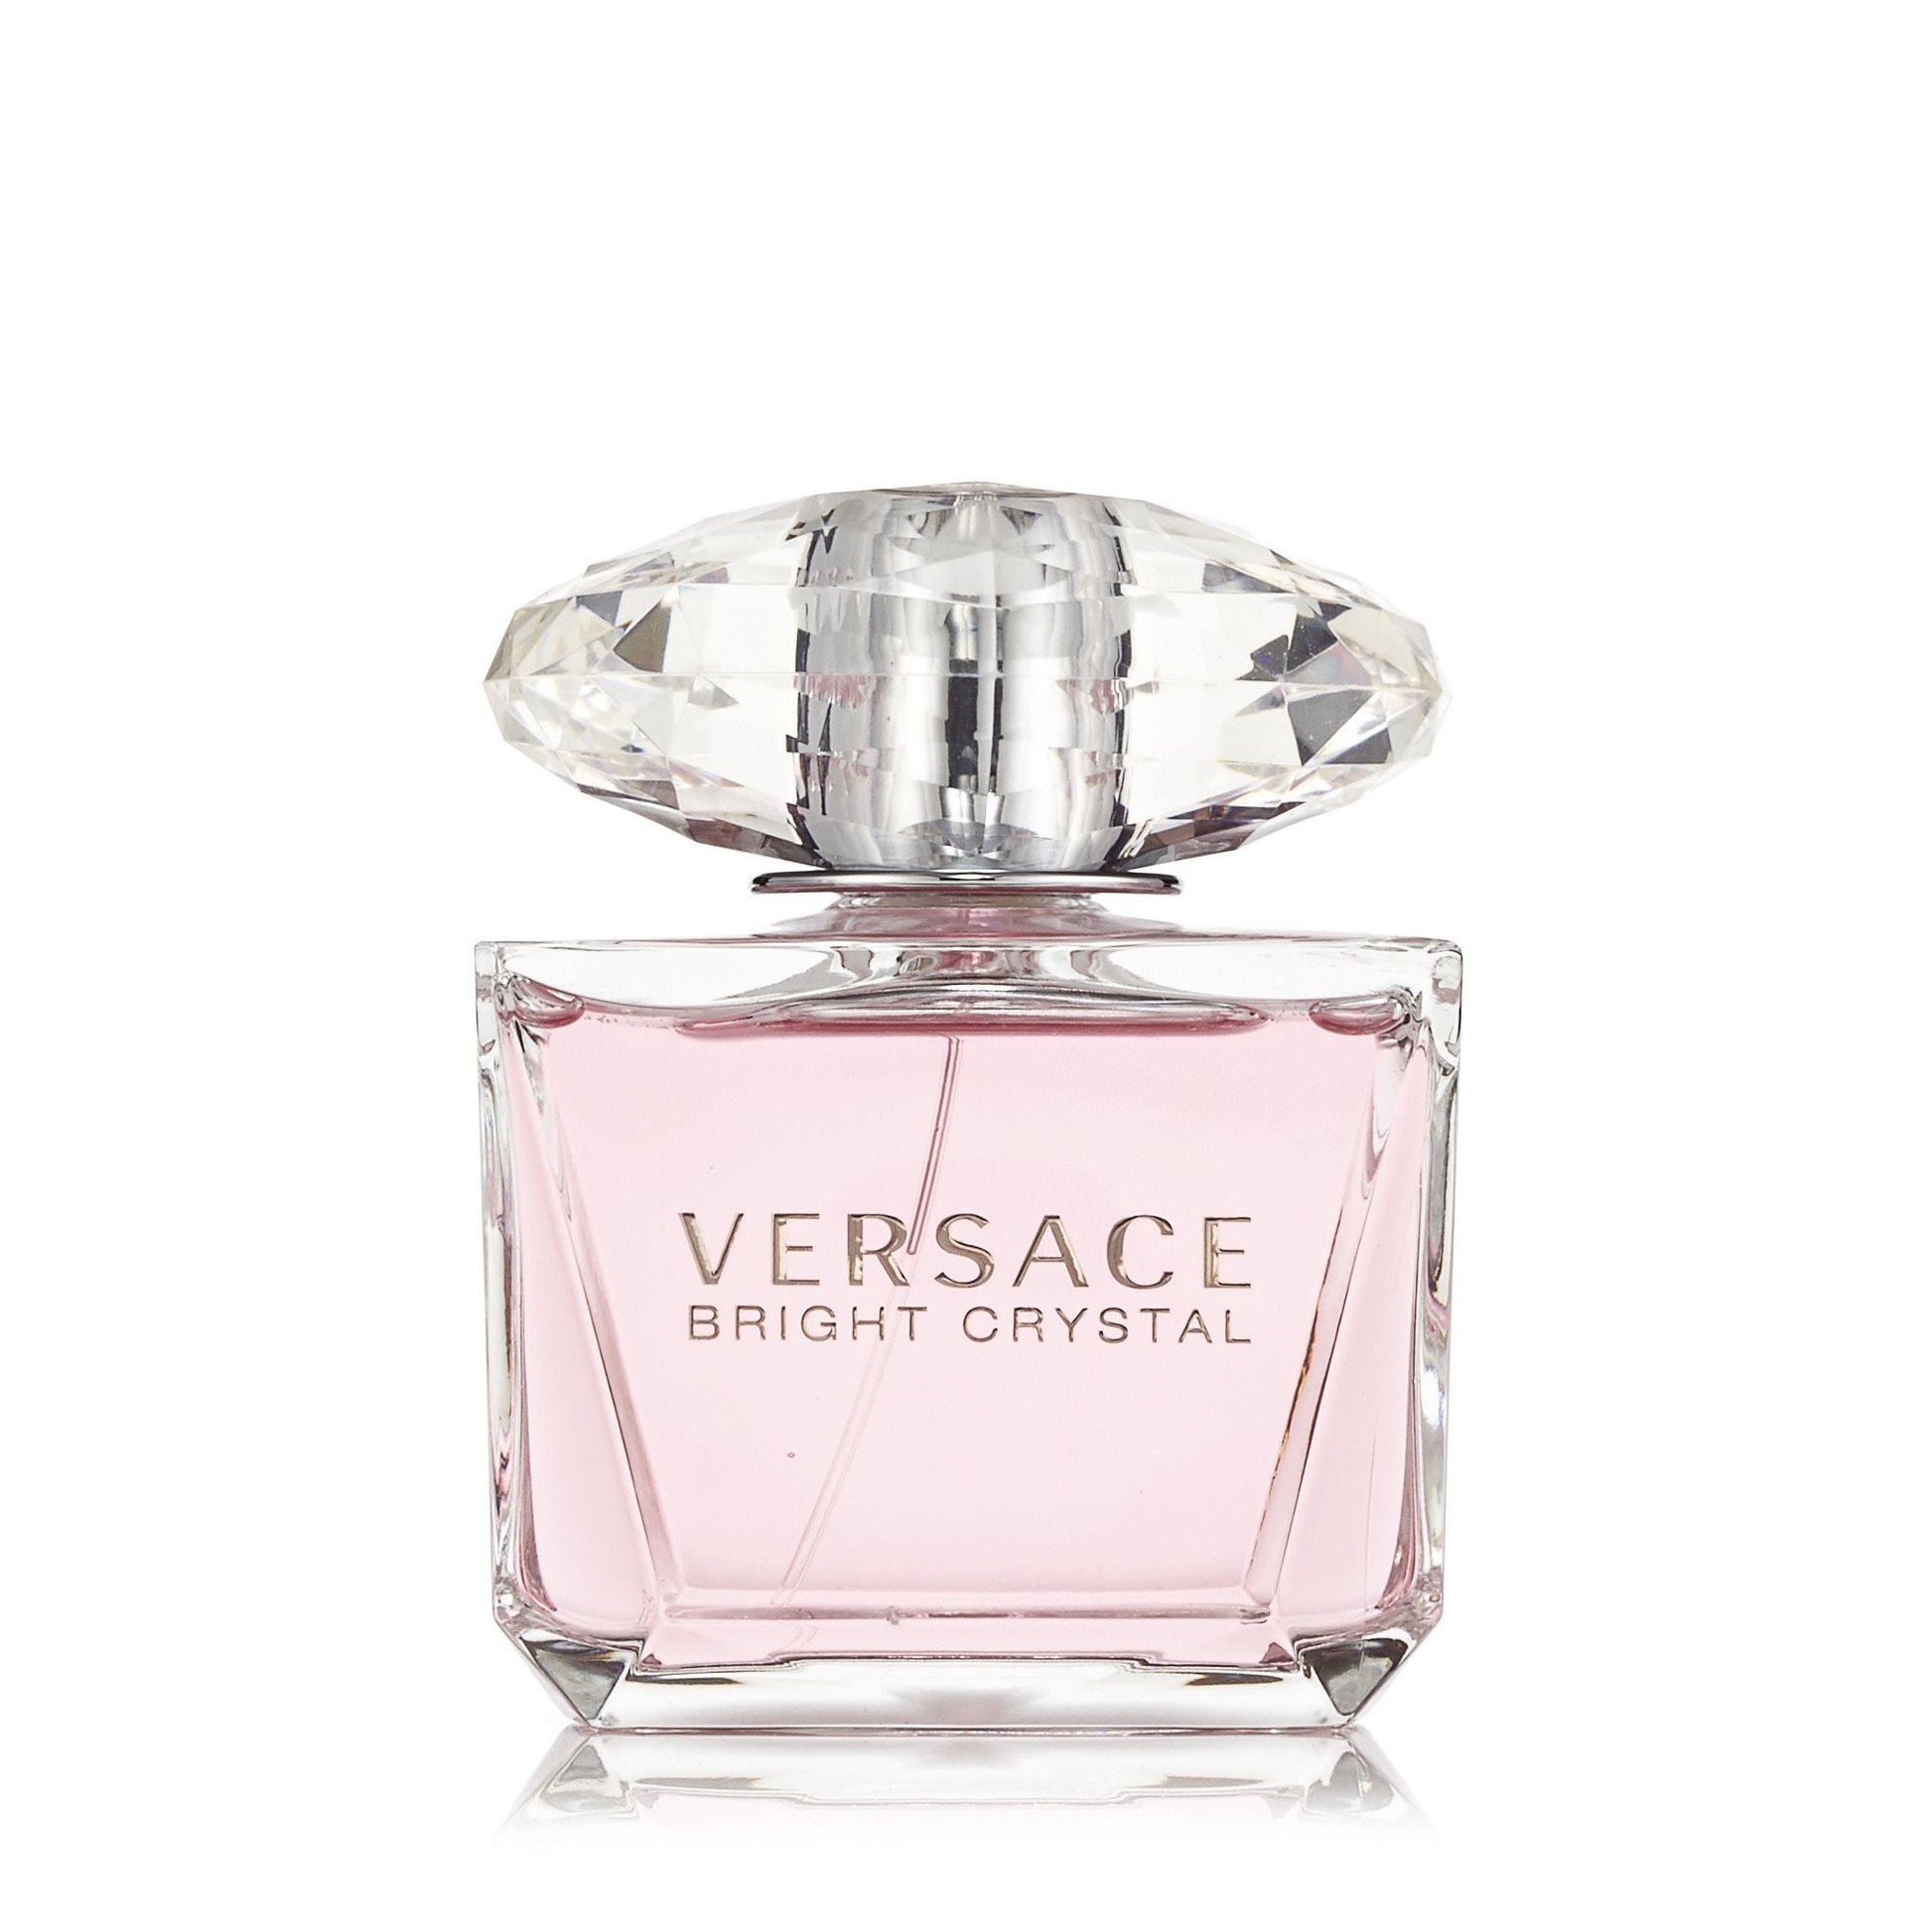 Bright Crystal Eau de Toilette Spray for Women by Versace, Product image 2